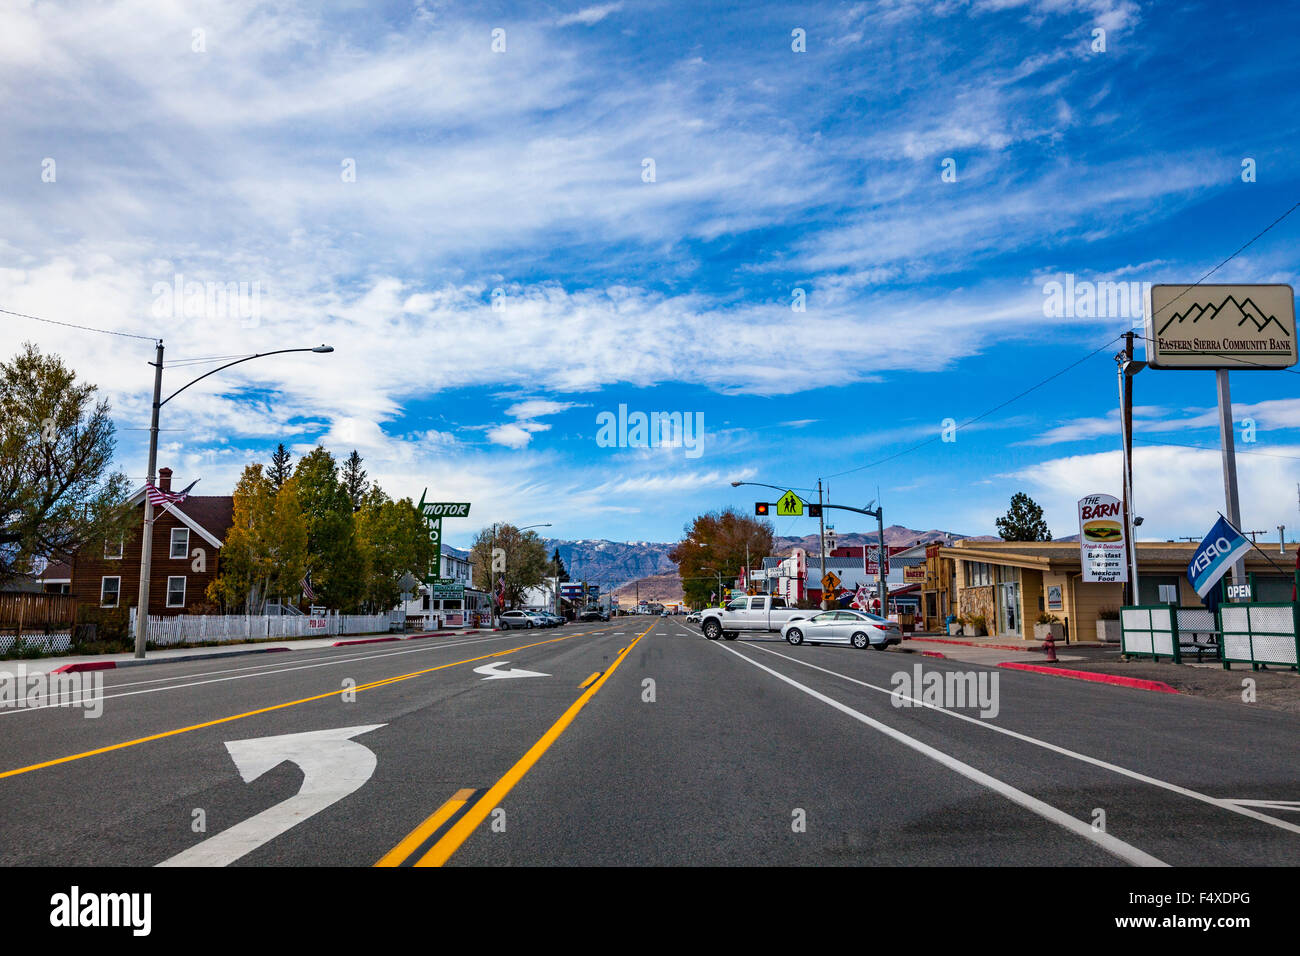 The town of Bridgeport in the Eastern Sierra Nevada mountains of California Stock Photo